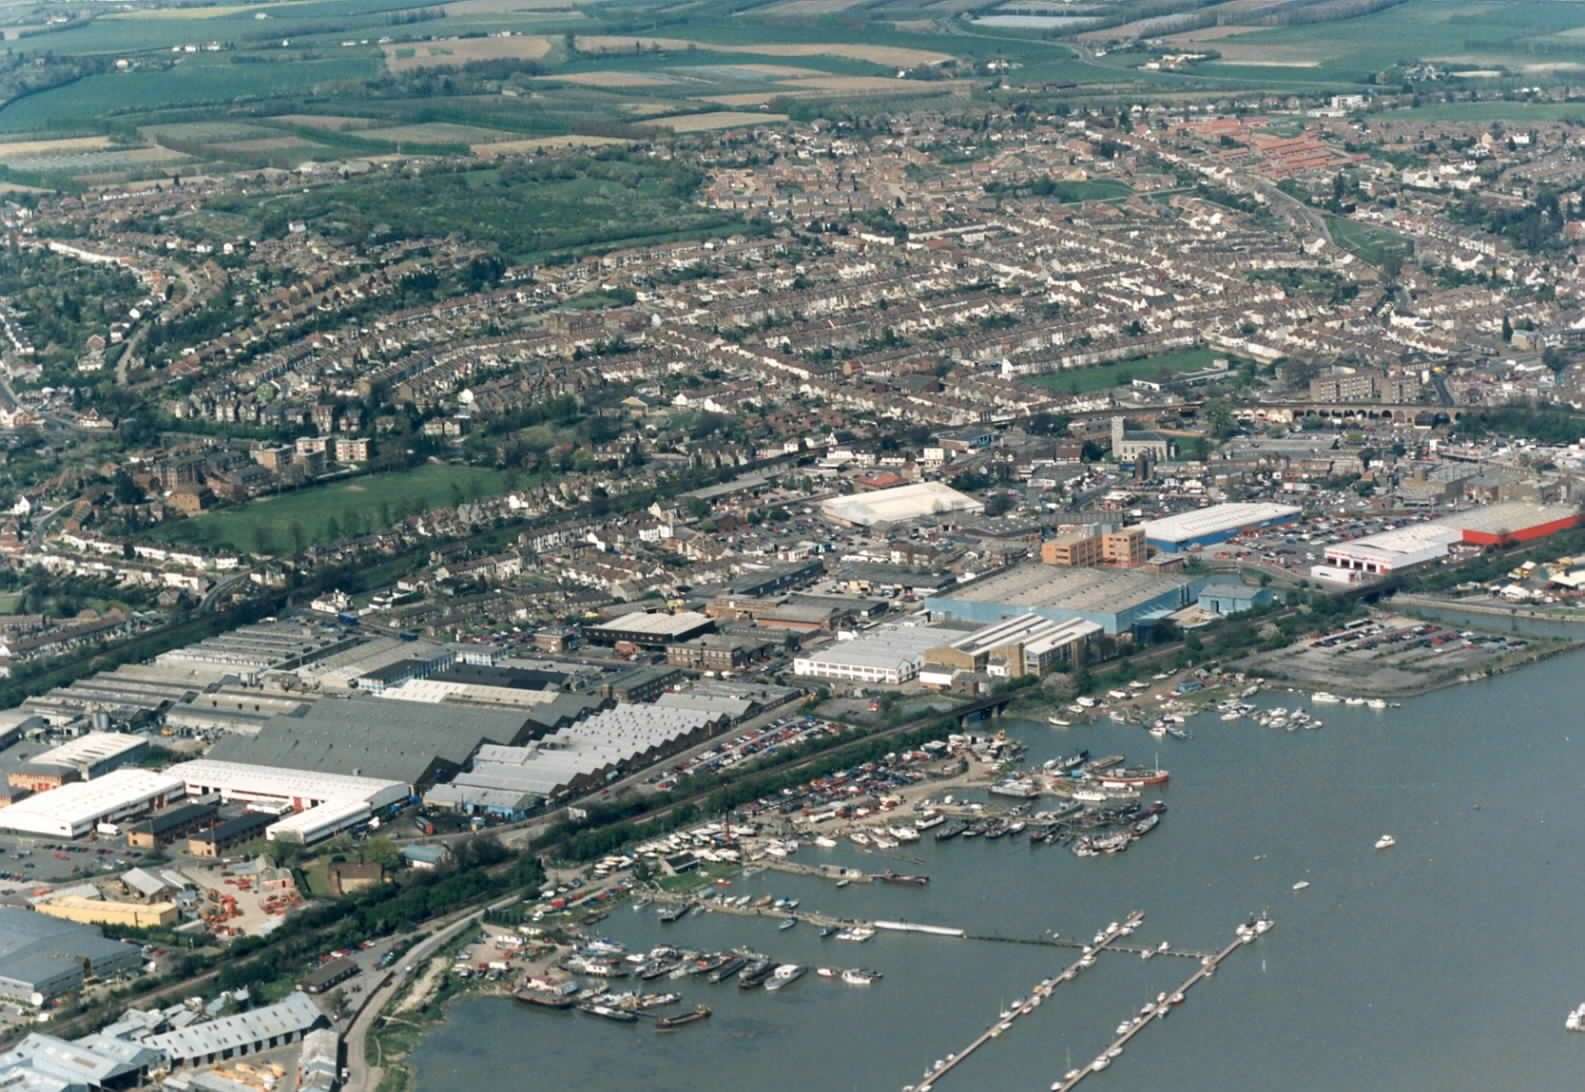 Strood from above in 1997